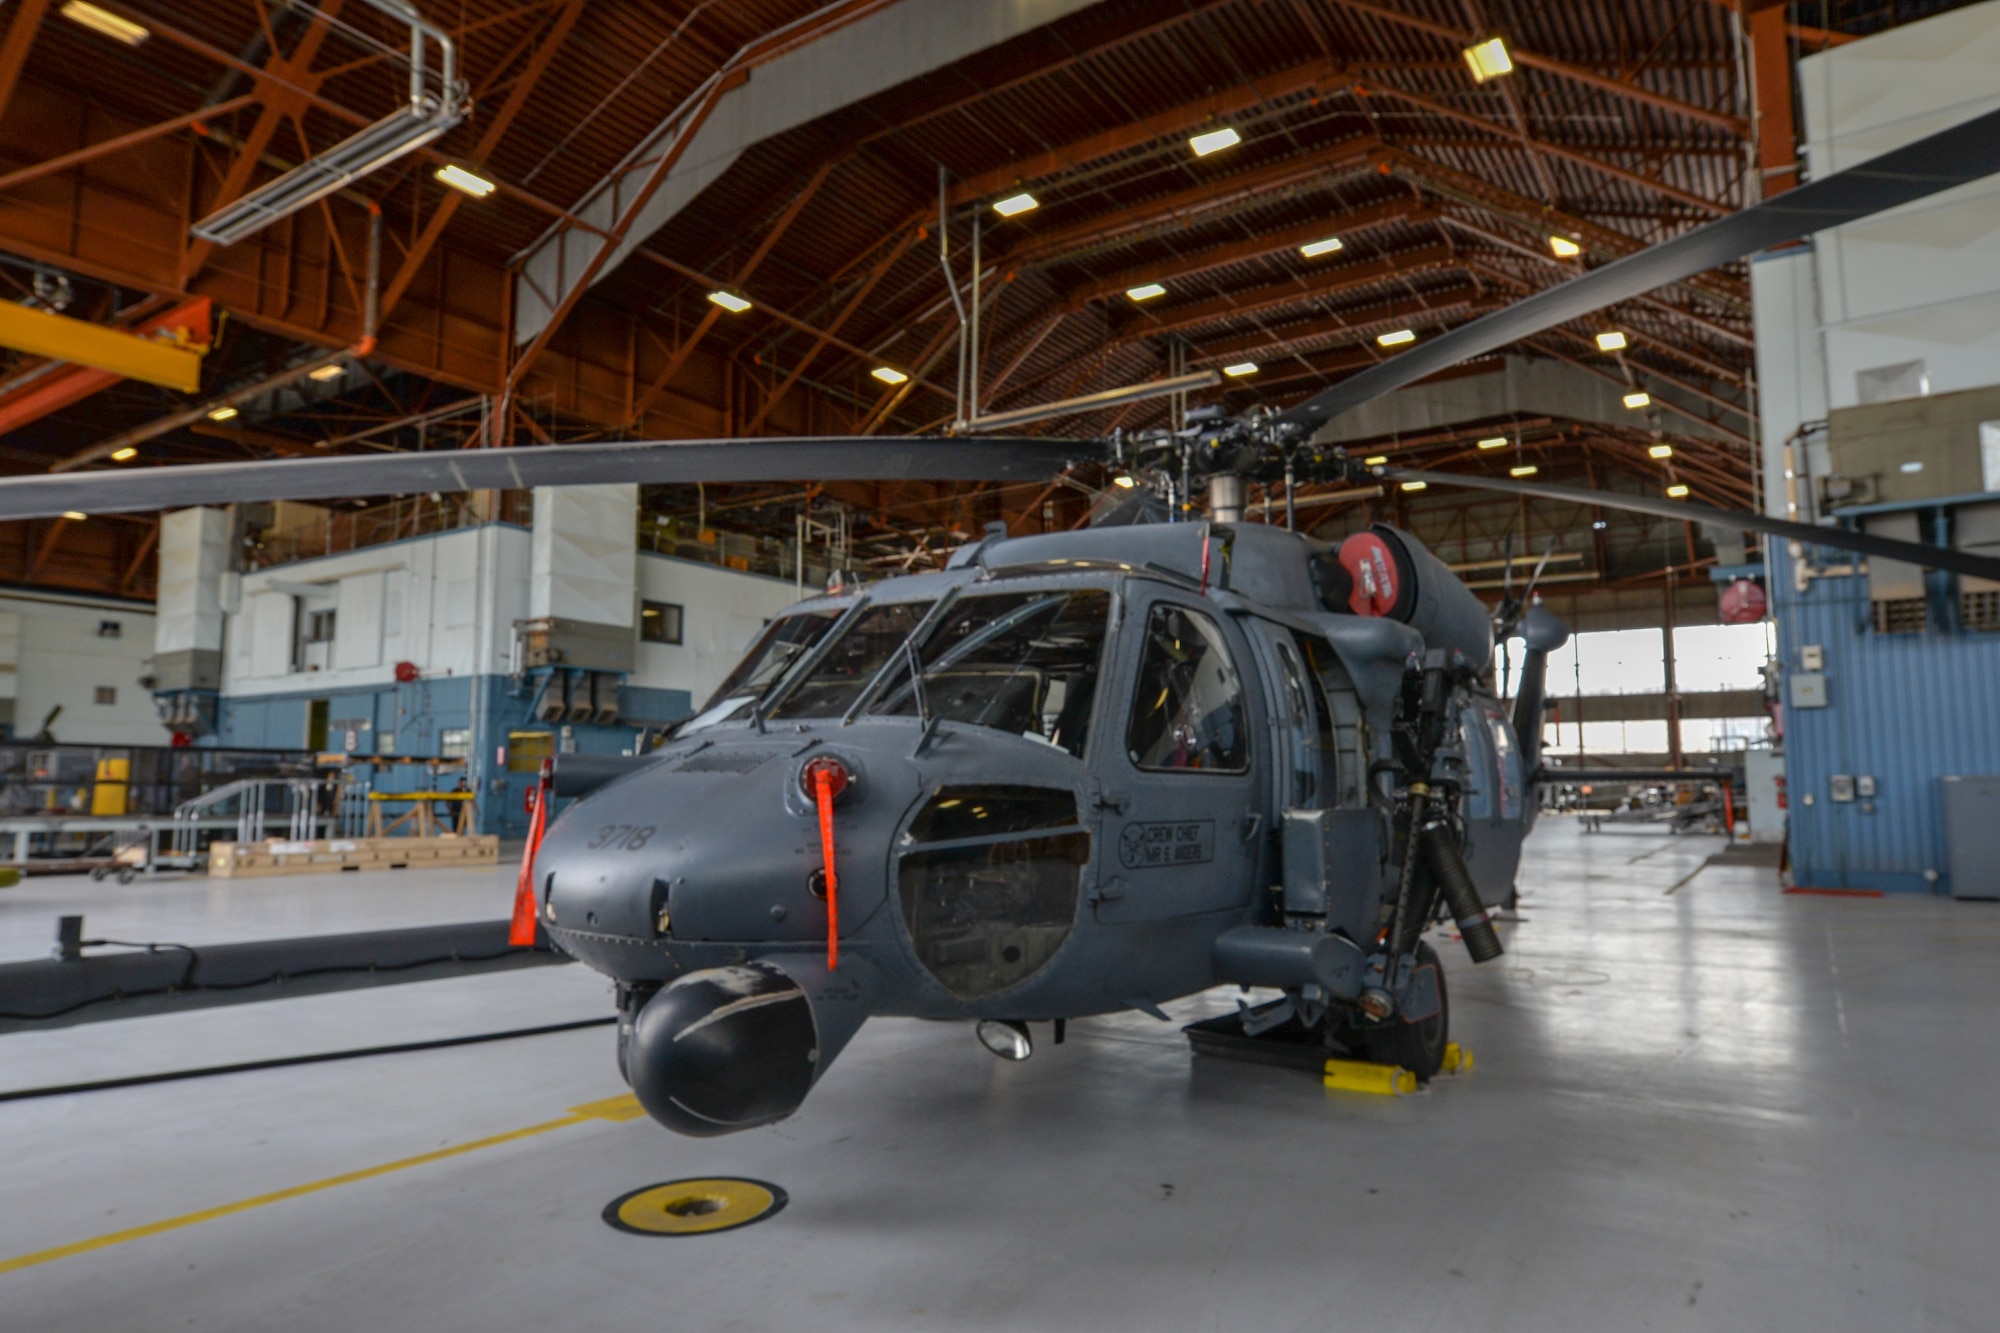 HH-60 sits in a hanger